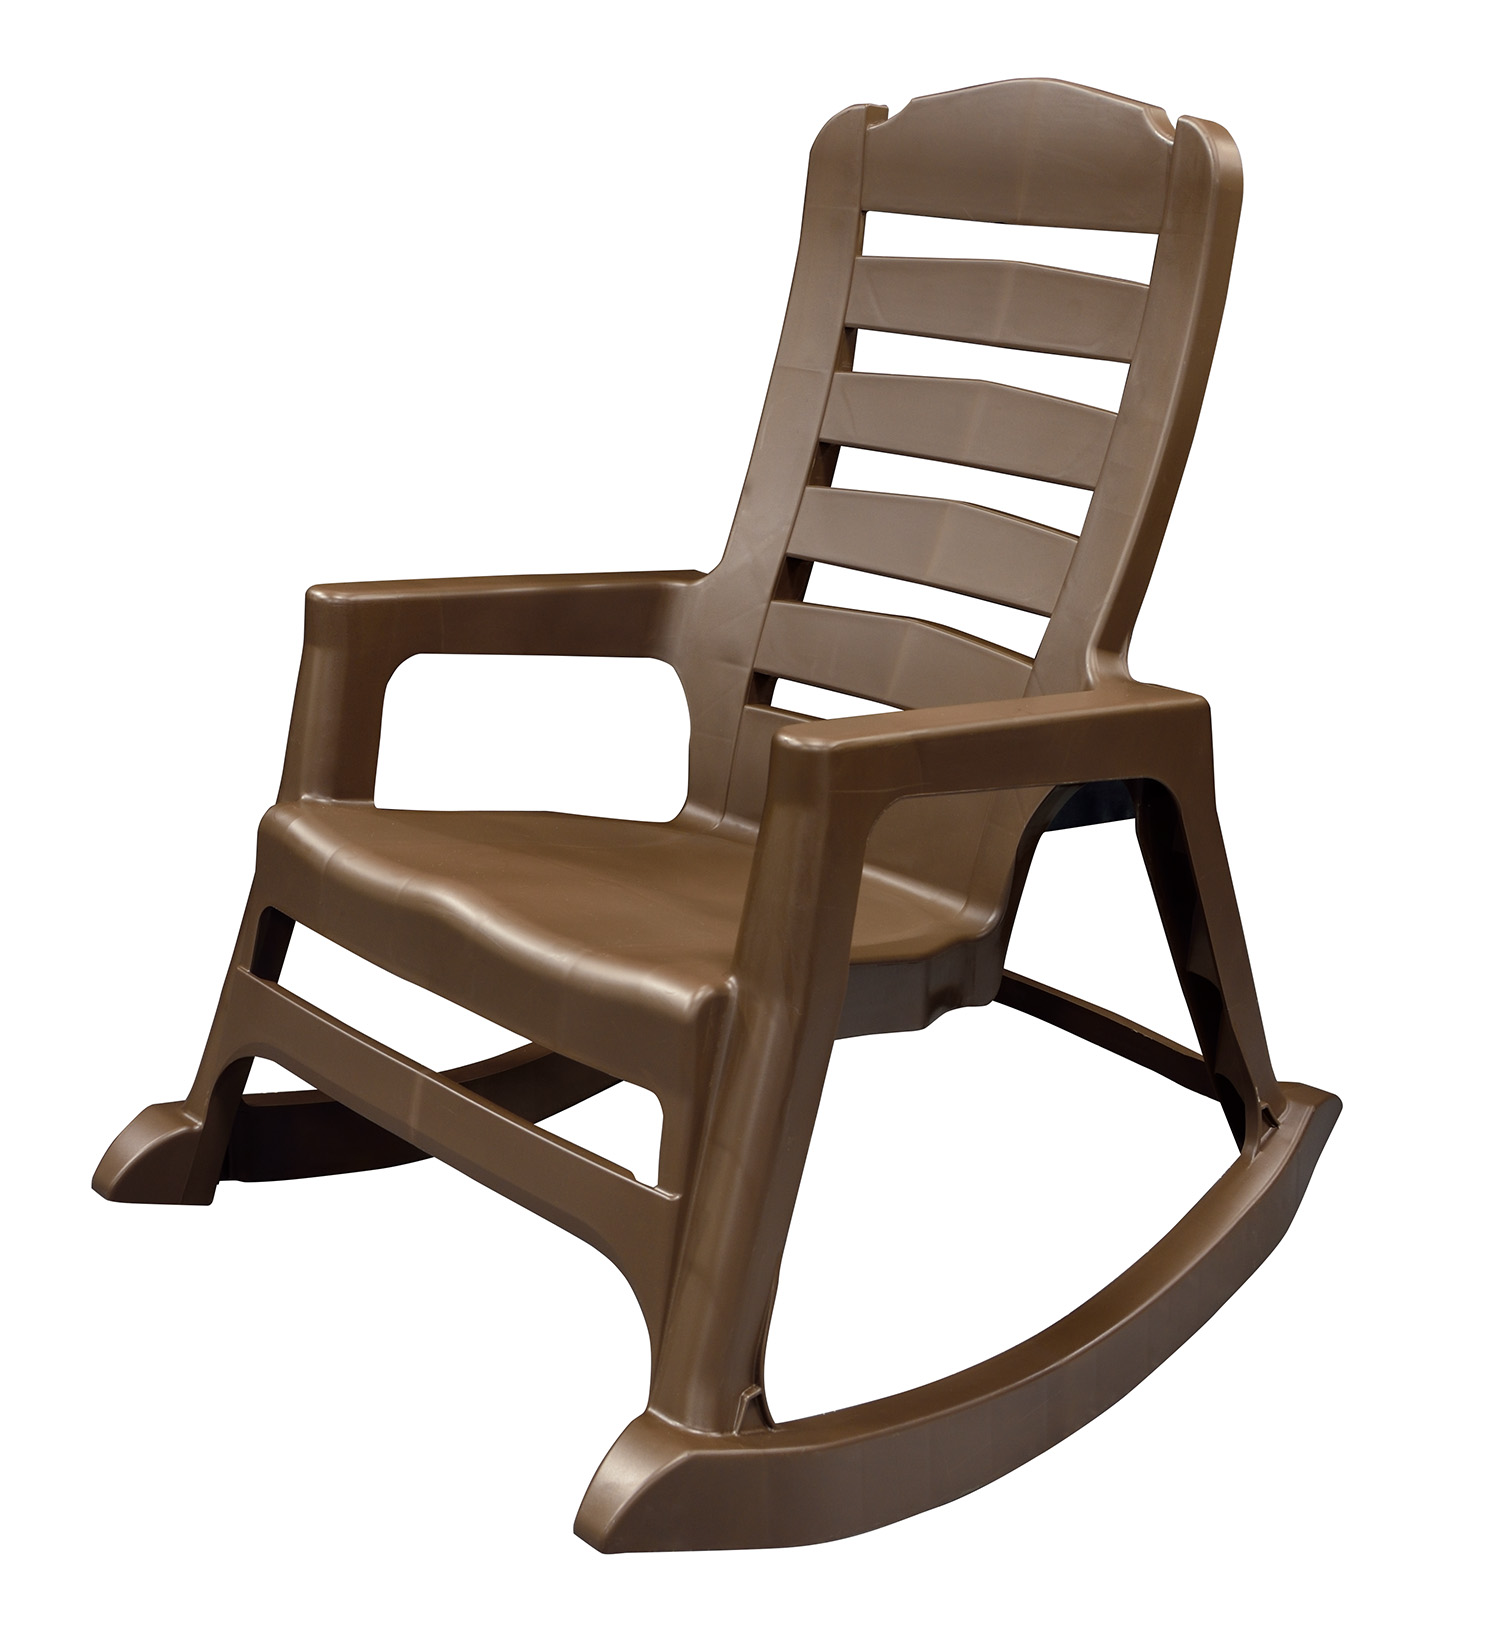 Big Easy Rocking Chair, Brown - image 1 of 2